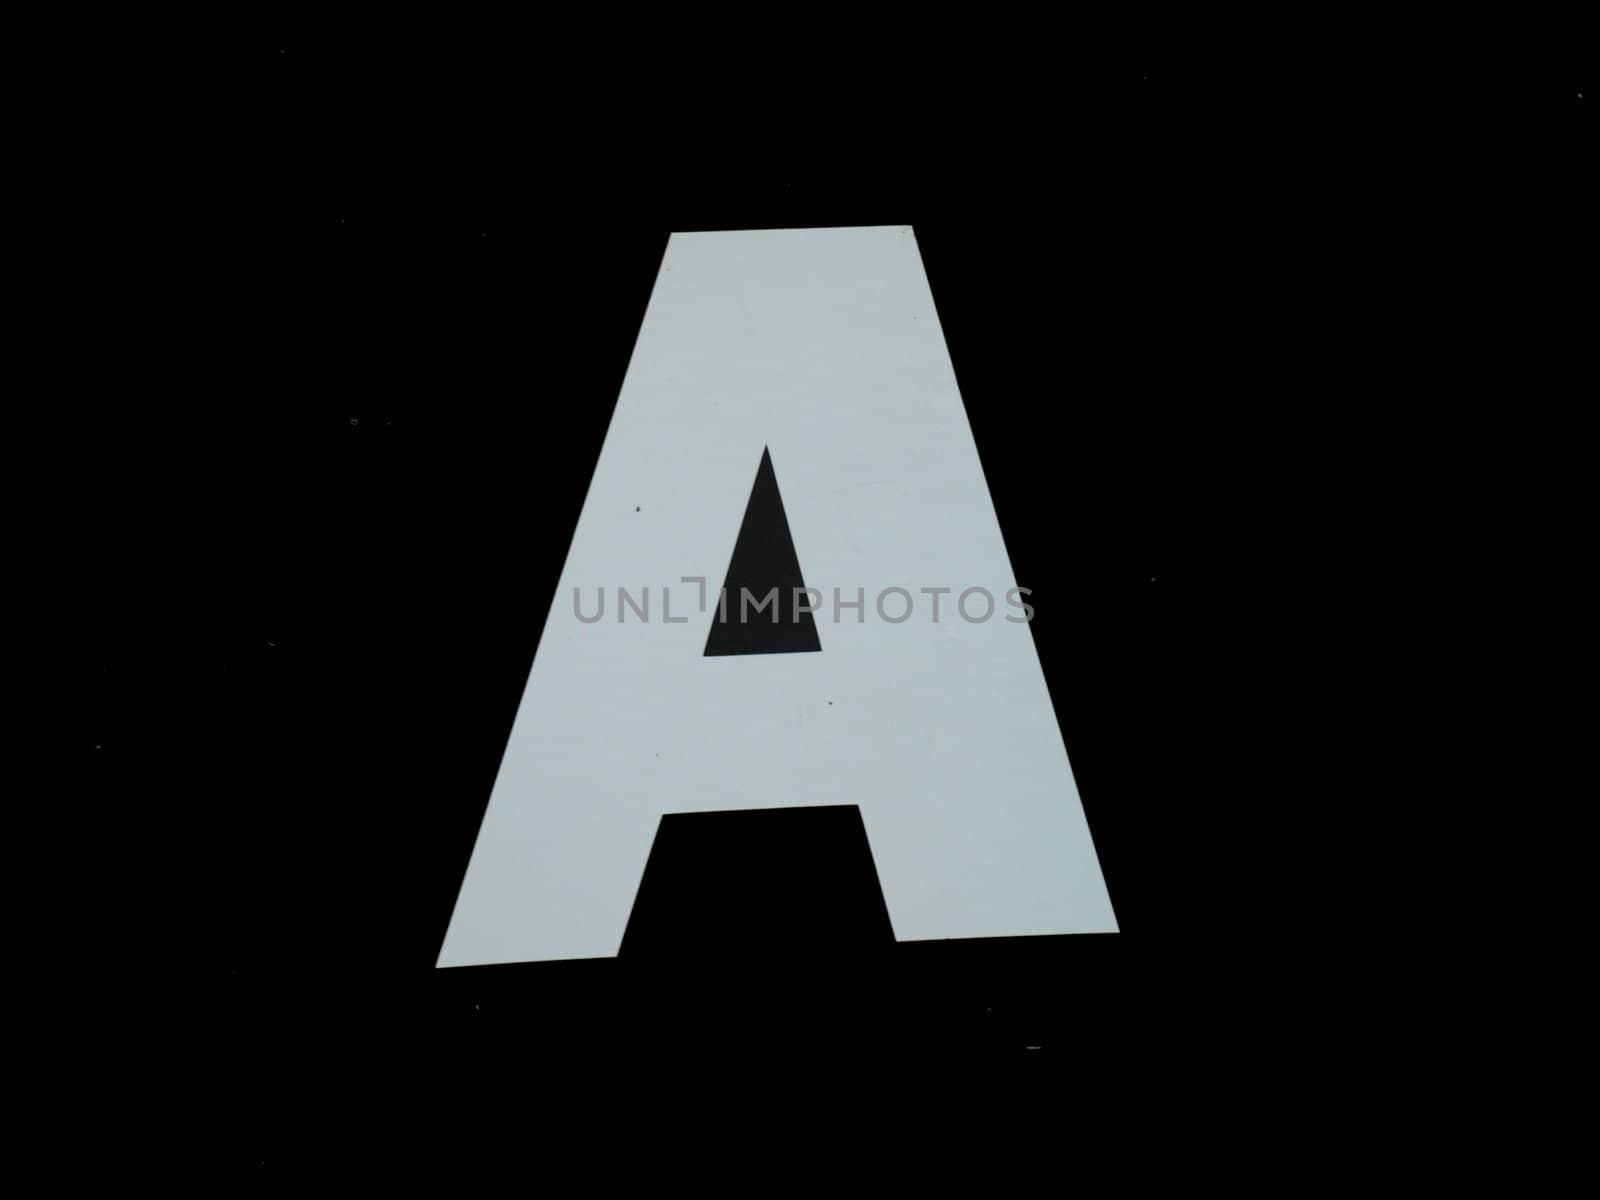 The letter a in black and white